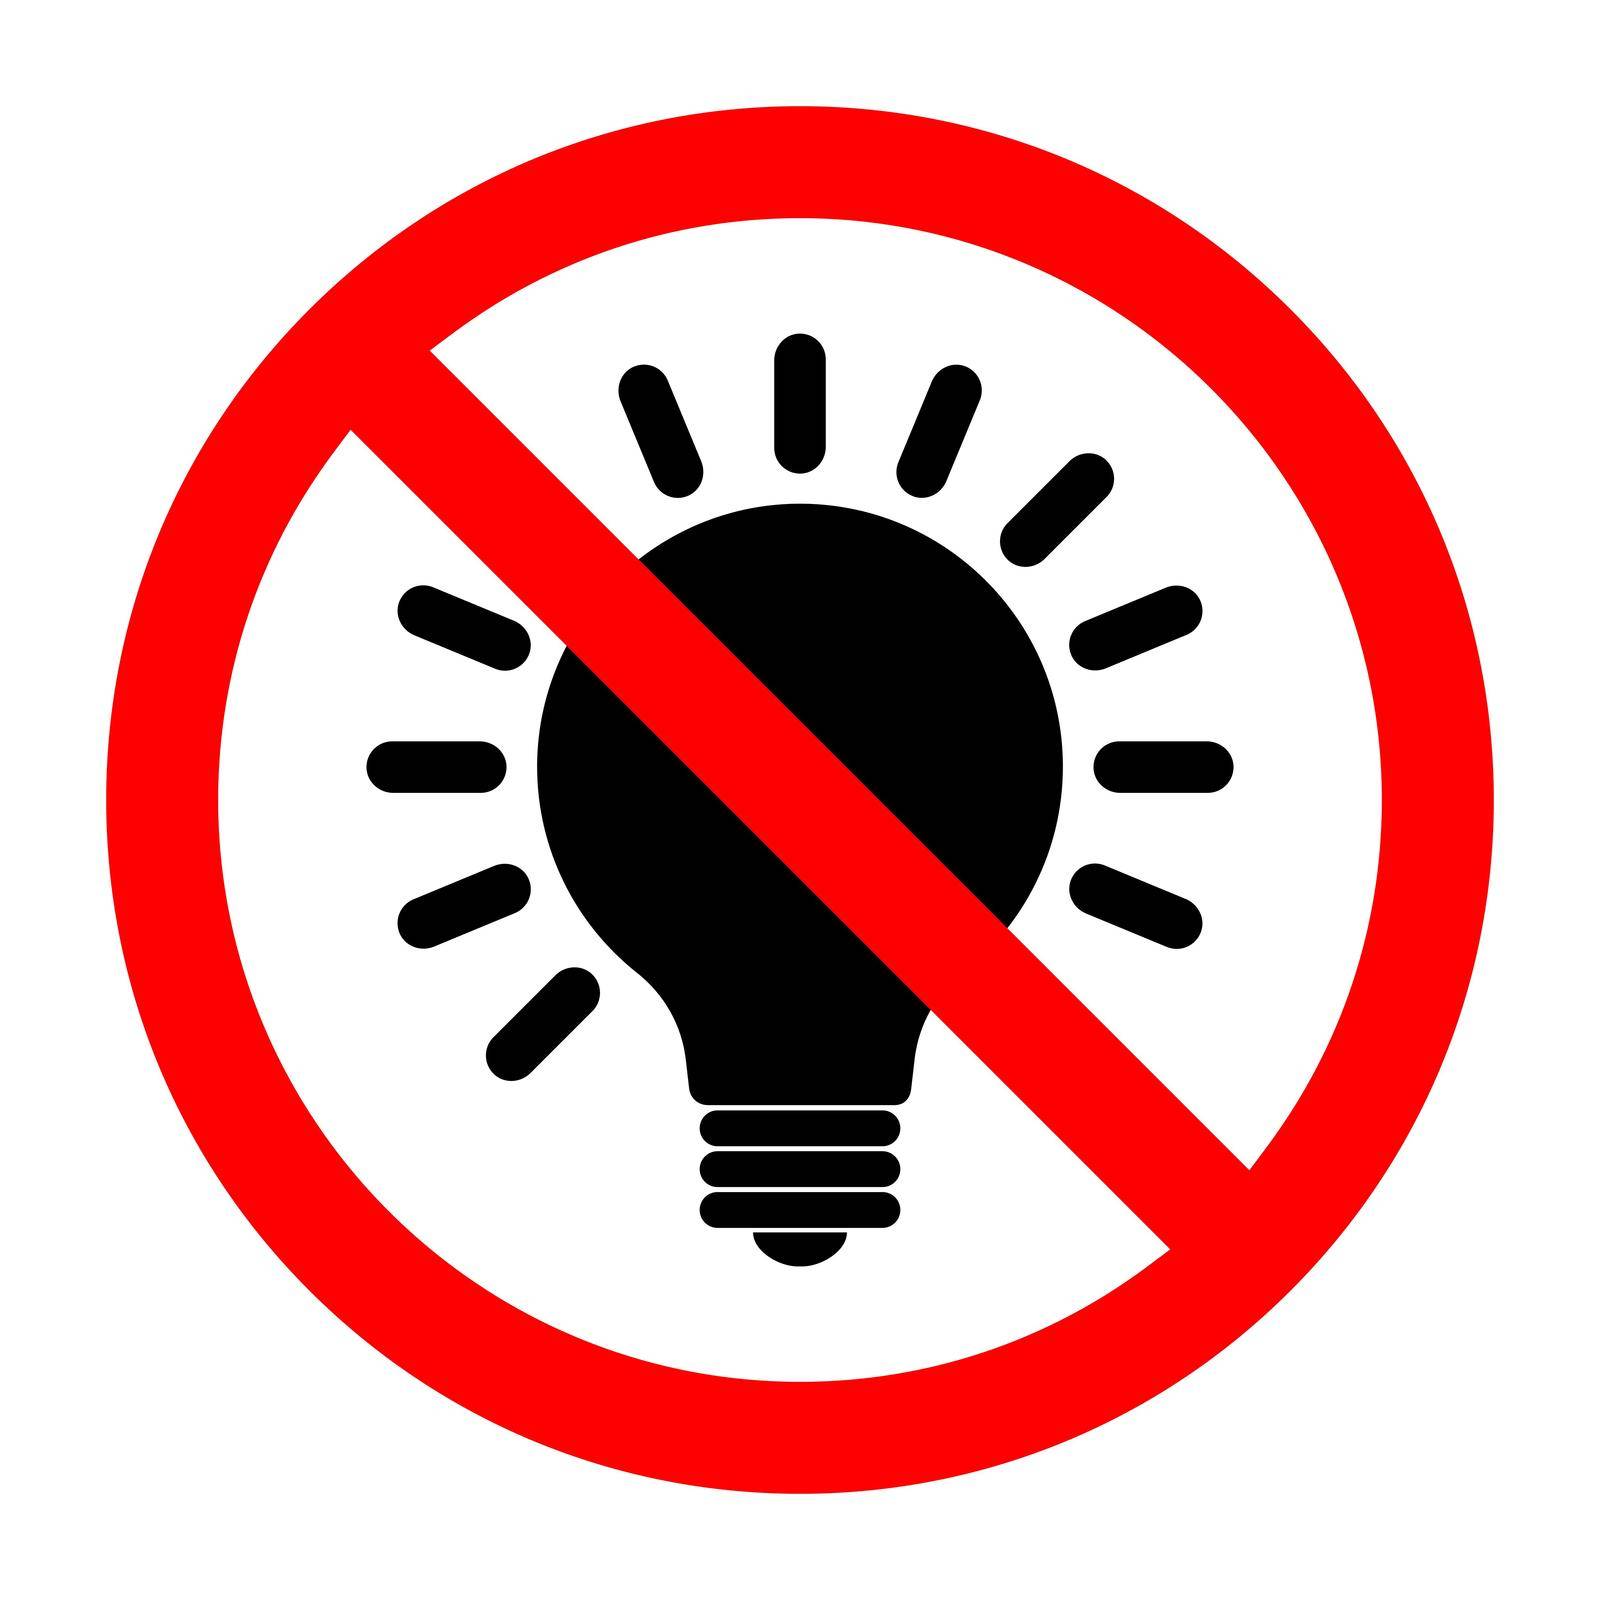 No light bulb icon. Light bulb is prohibited. Stop or ban red round sign with light bulb icon. Vector illustration. Forbidden sign.